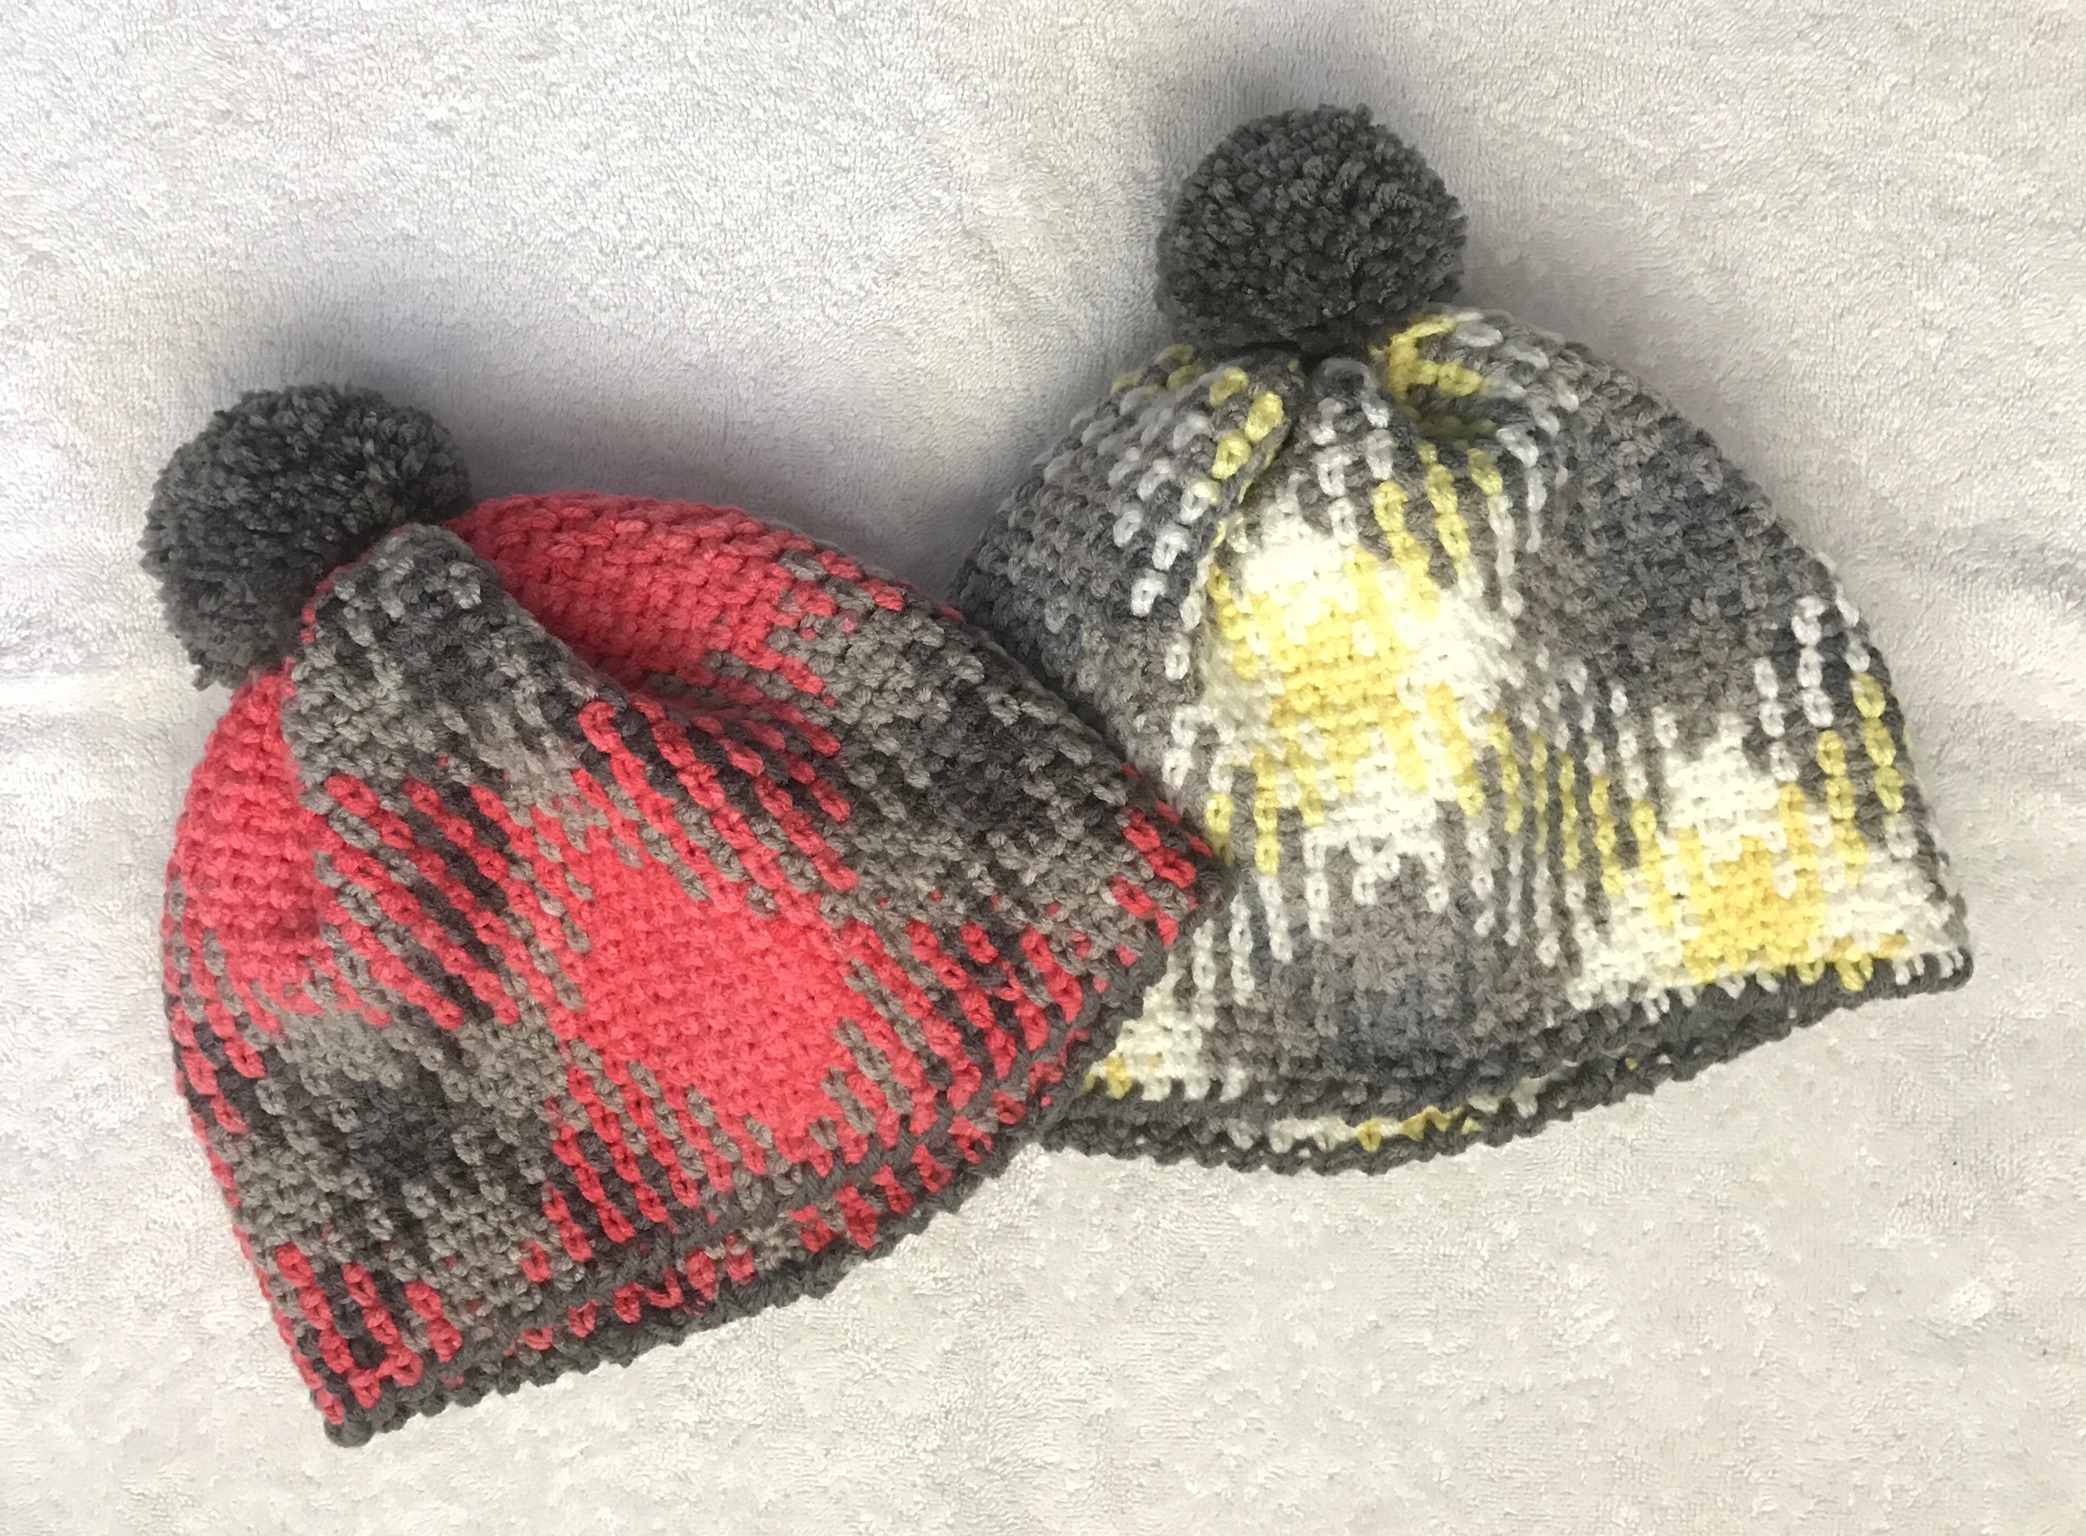 This Planned Pooling technique looks like so much fun.... Wouldn't this hat look great on the ski slopes? Fun free crochet hat pattern